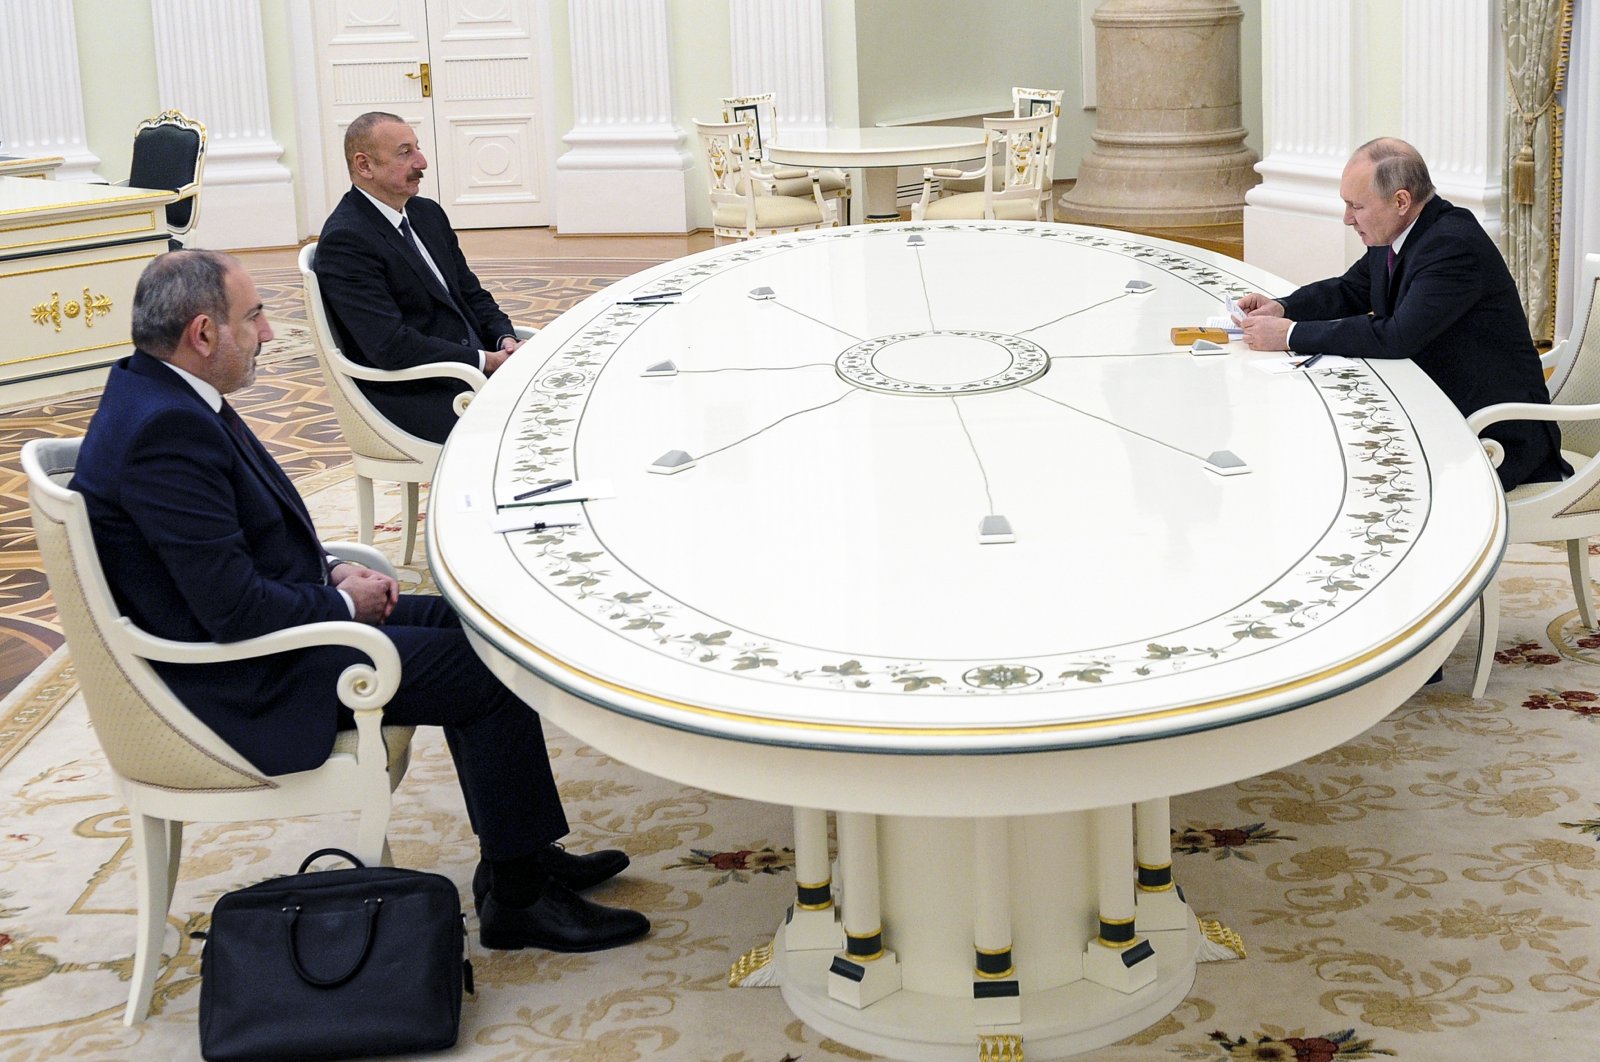 FILE - Russian President Vladimir Putin, right, attends talks with Azerbaijan's President Ilham Aliyev, second left, and Armenian Prime Minister Nikol Pashinyan, left, at the Kremlin in Moscow, on Jan. 11, 2021. Armenian Prime Minister Nikol Pashinyan said Thursday, March 31, 2022 he will meet with Azerbaijani President Ilham Aliyev in Brussels on April 6 and for talks to end the decades-long conflict over the separatist region of Nagorno-Karabakh. (Mikhail Klimentyev, Sputnik, Kremlin Pool Photo via AP)